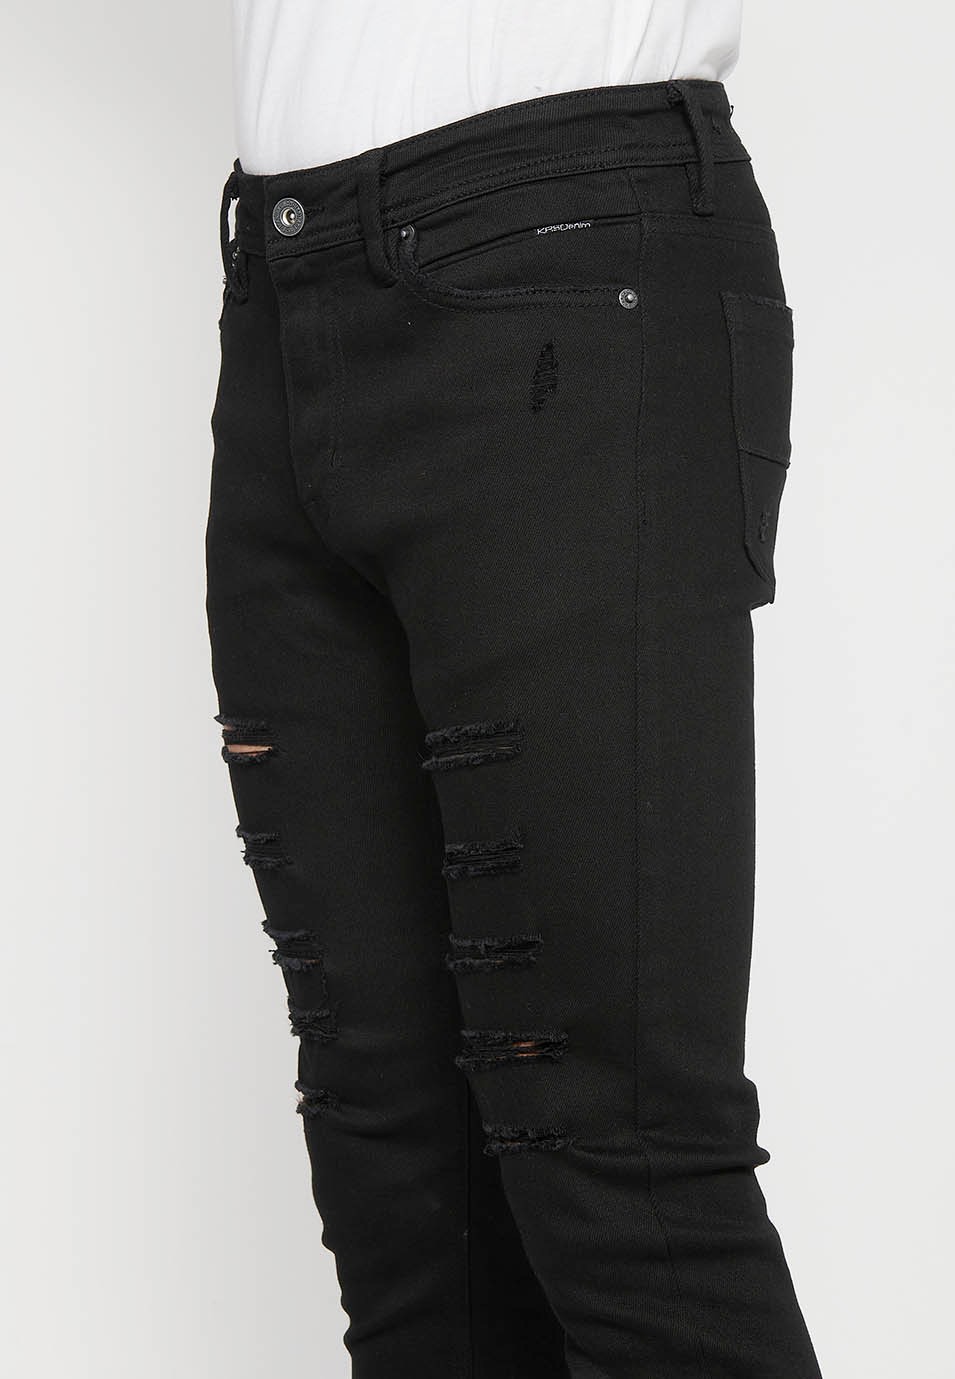 Long slim super skinny jeans with front closure with zipper and button in Black Denim Color for Men 8